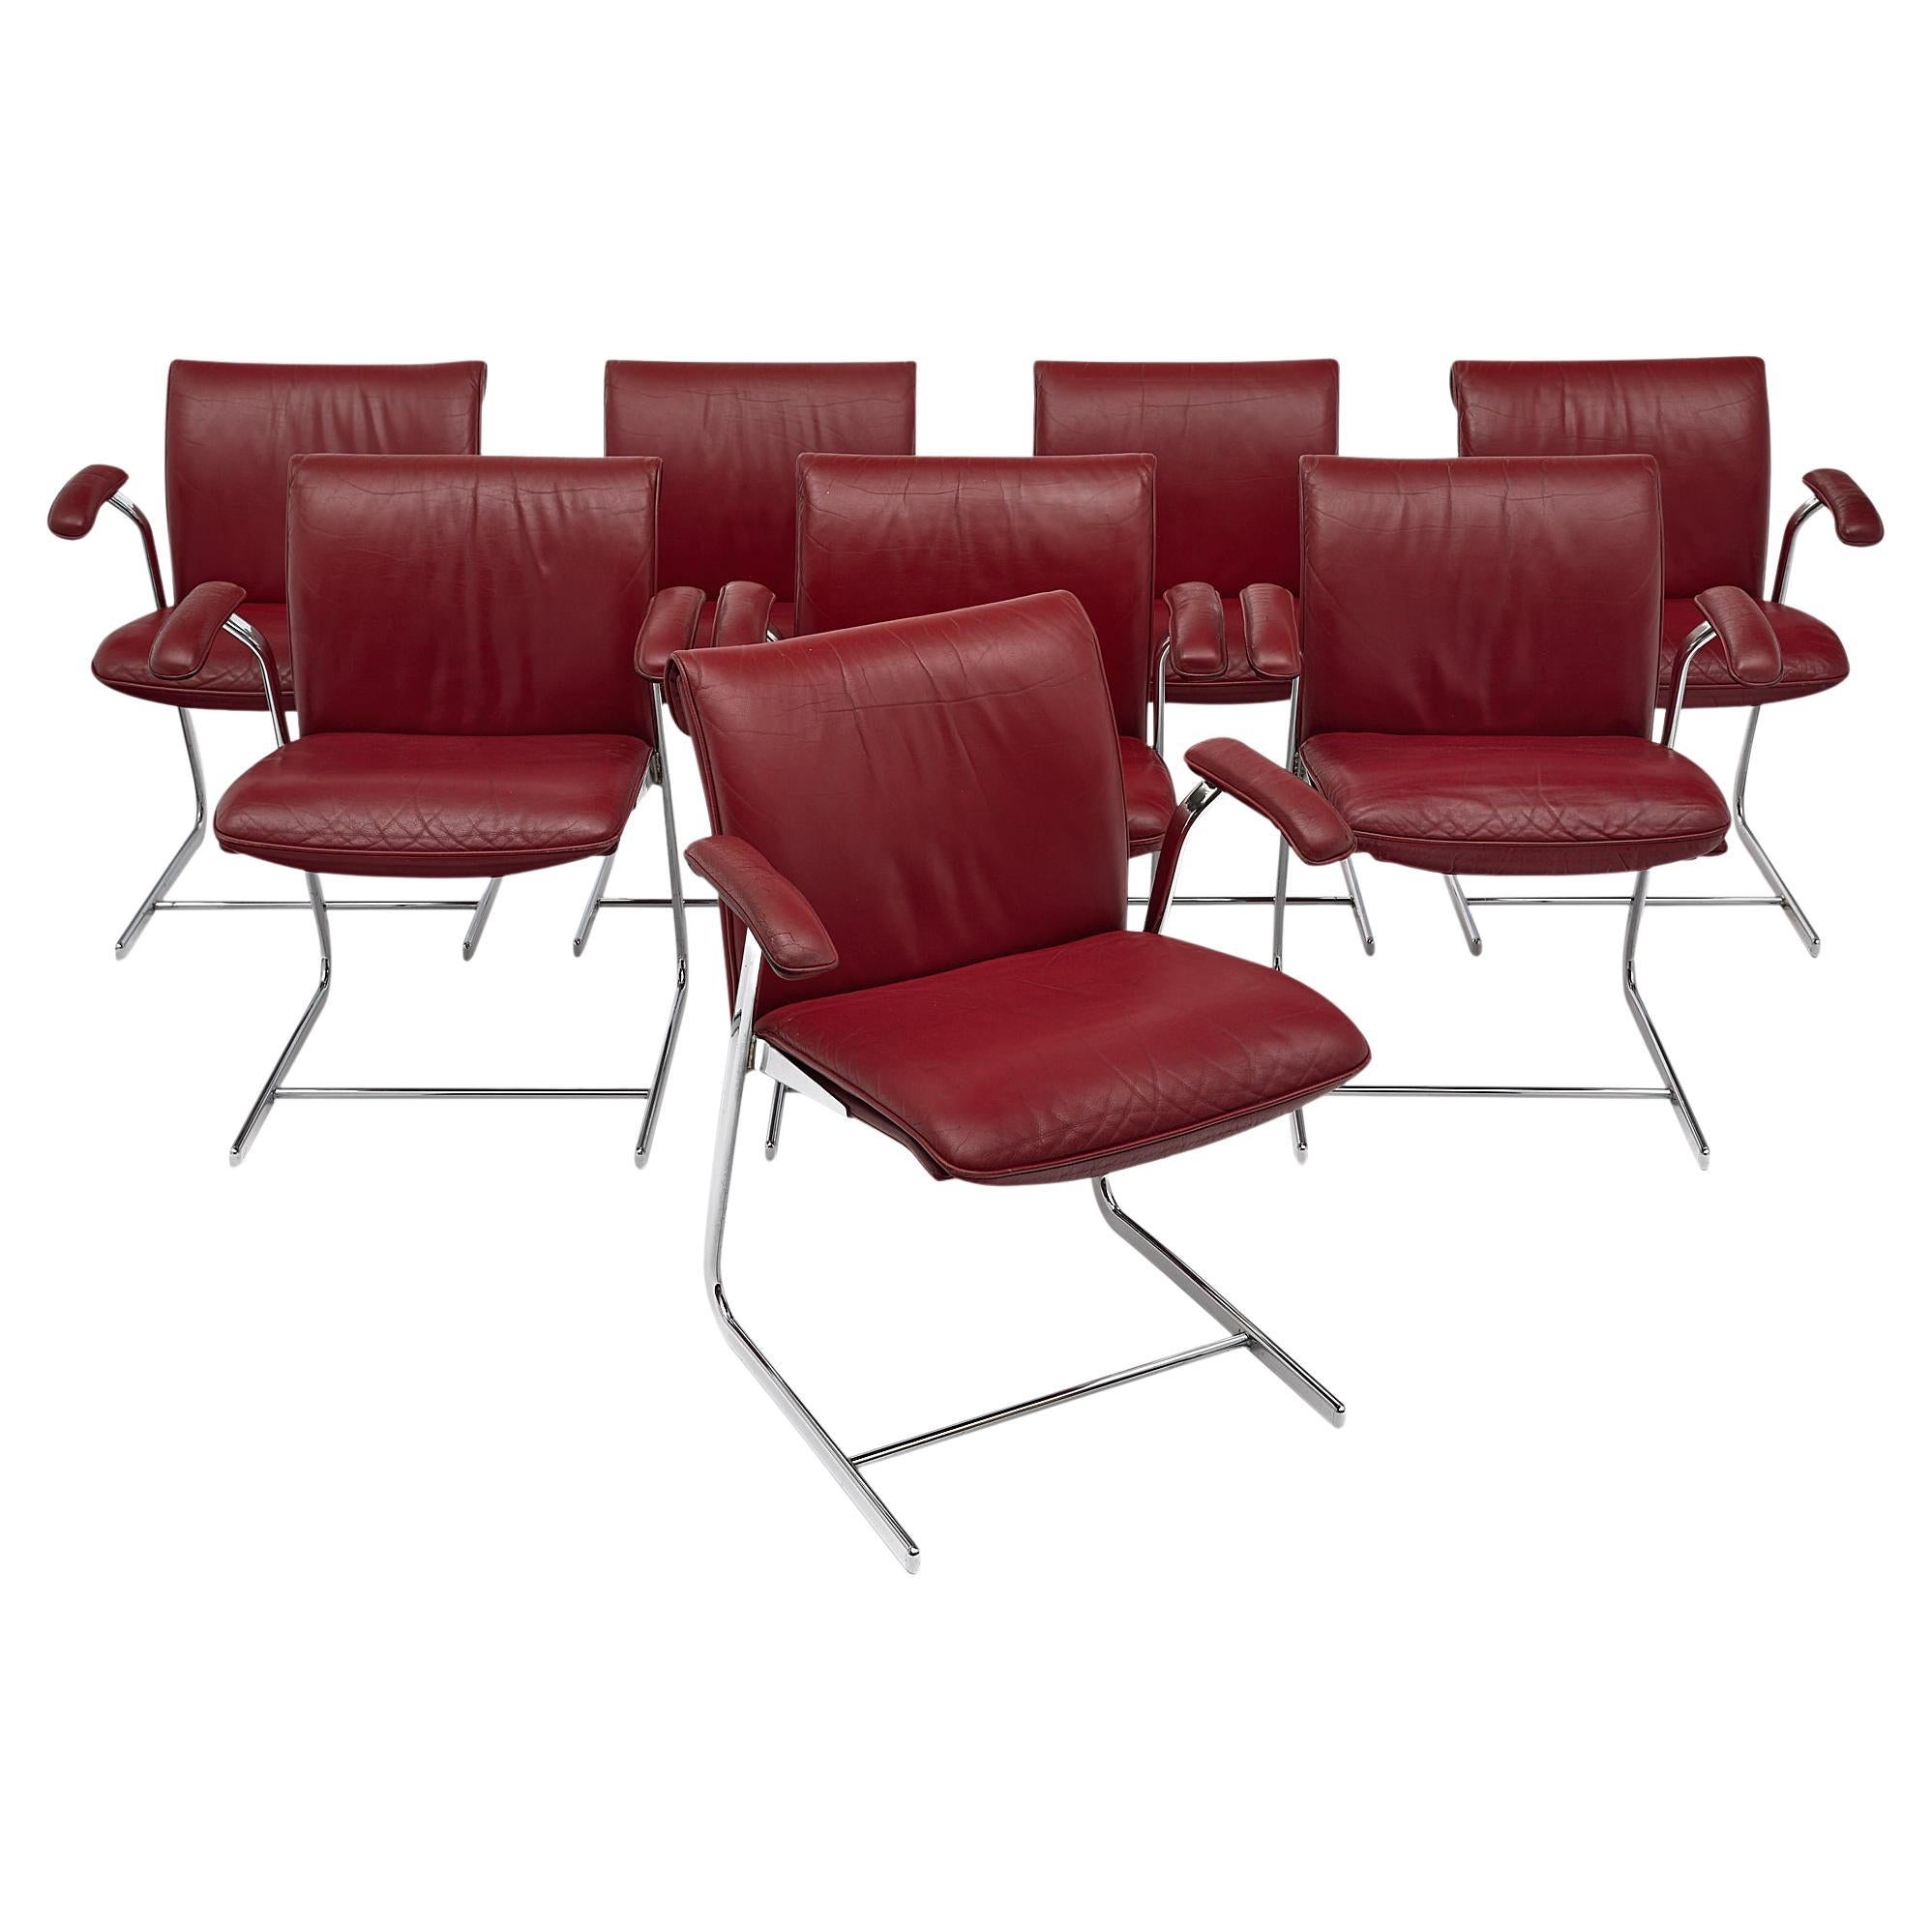 Set of Red Leather and Chrome Armchairs For Sale